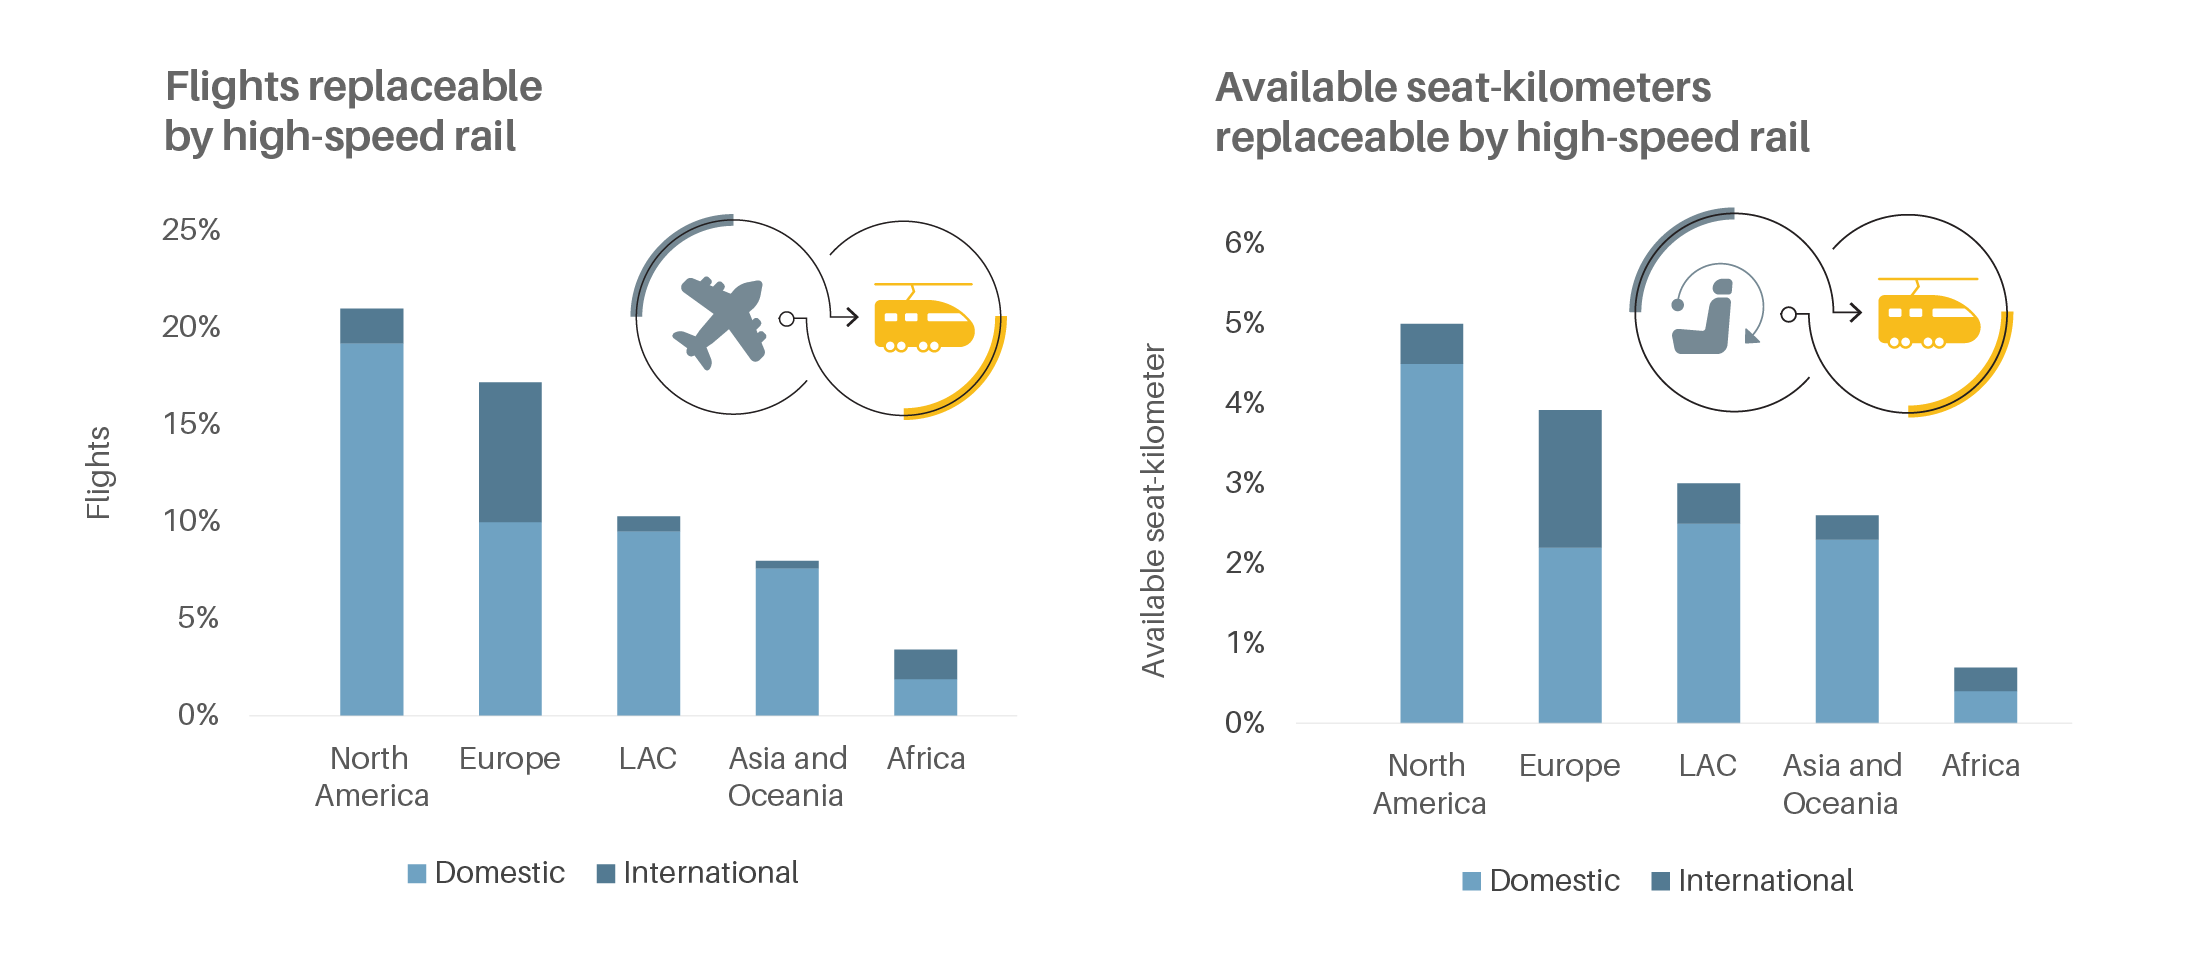 Potential of high-speed rail to displace air travel, by region